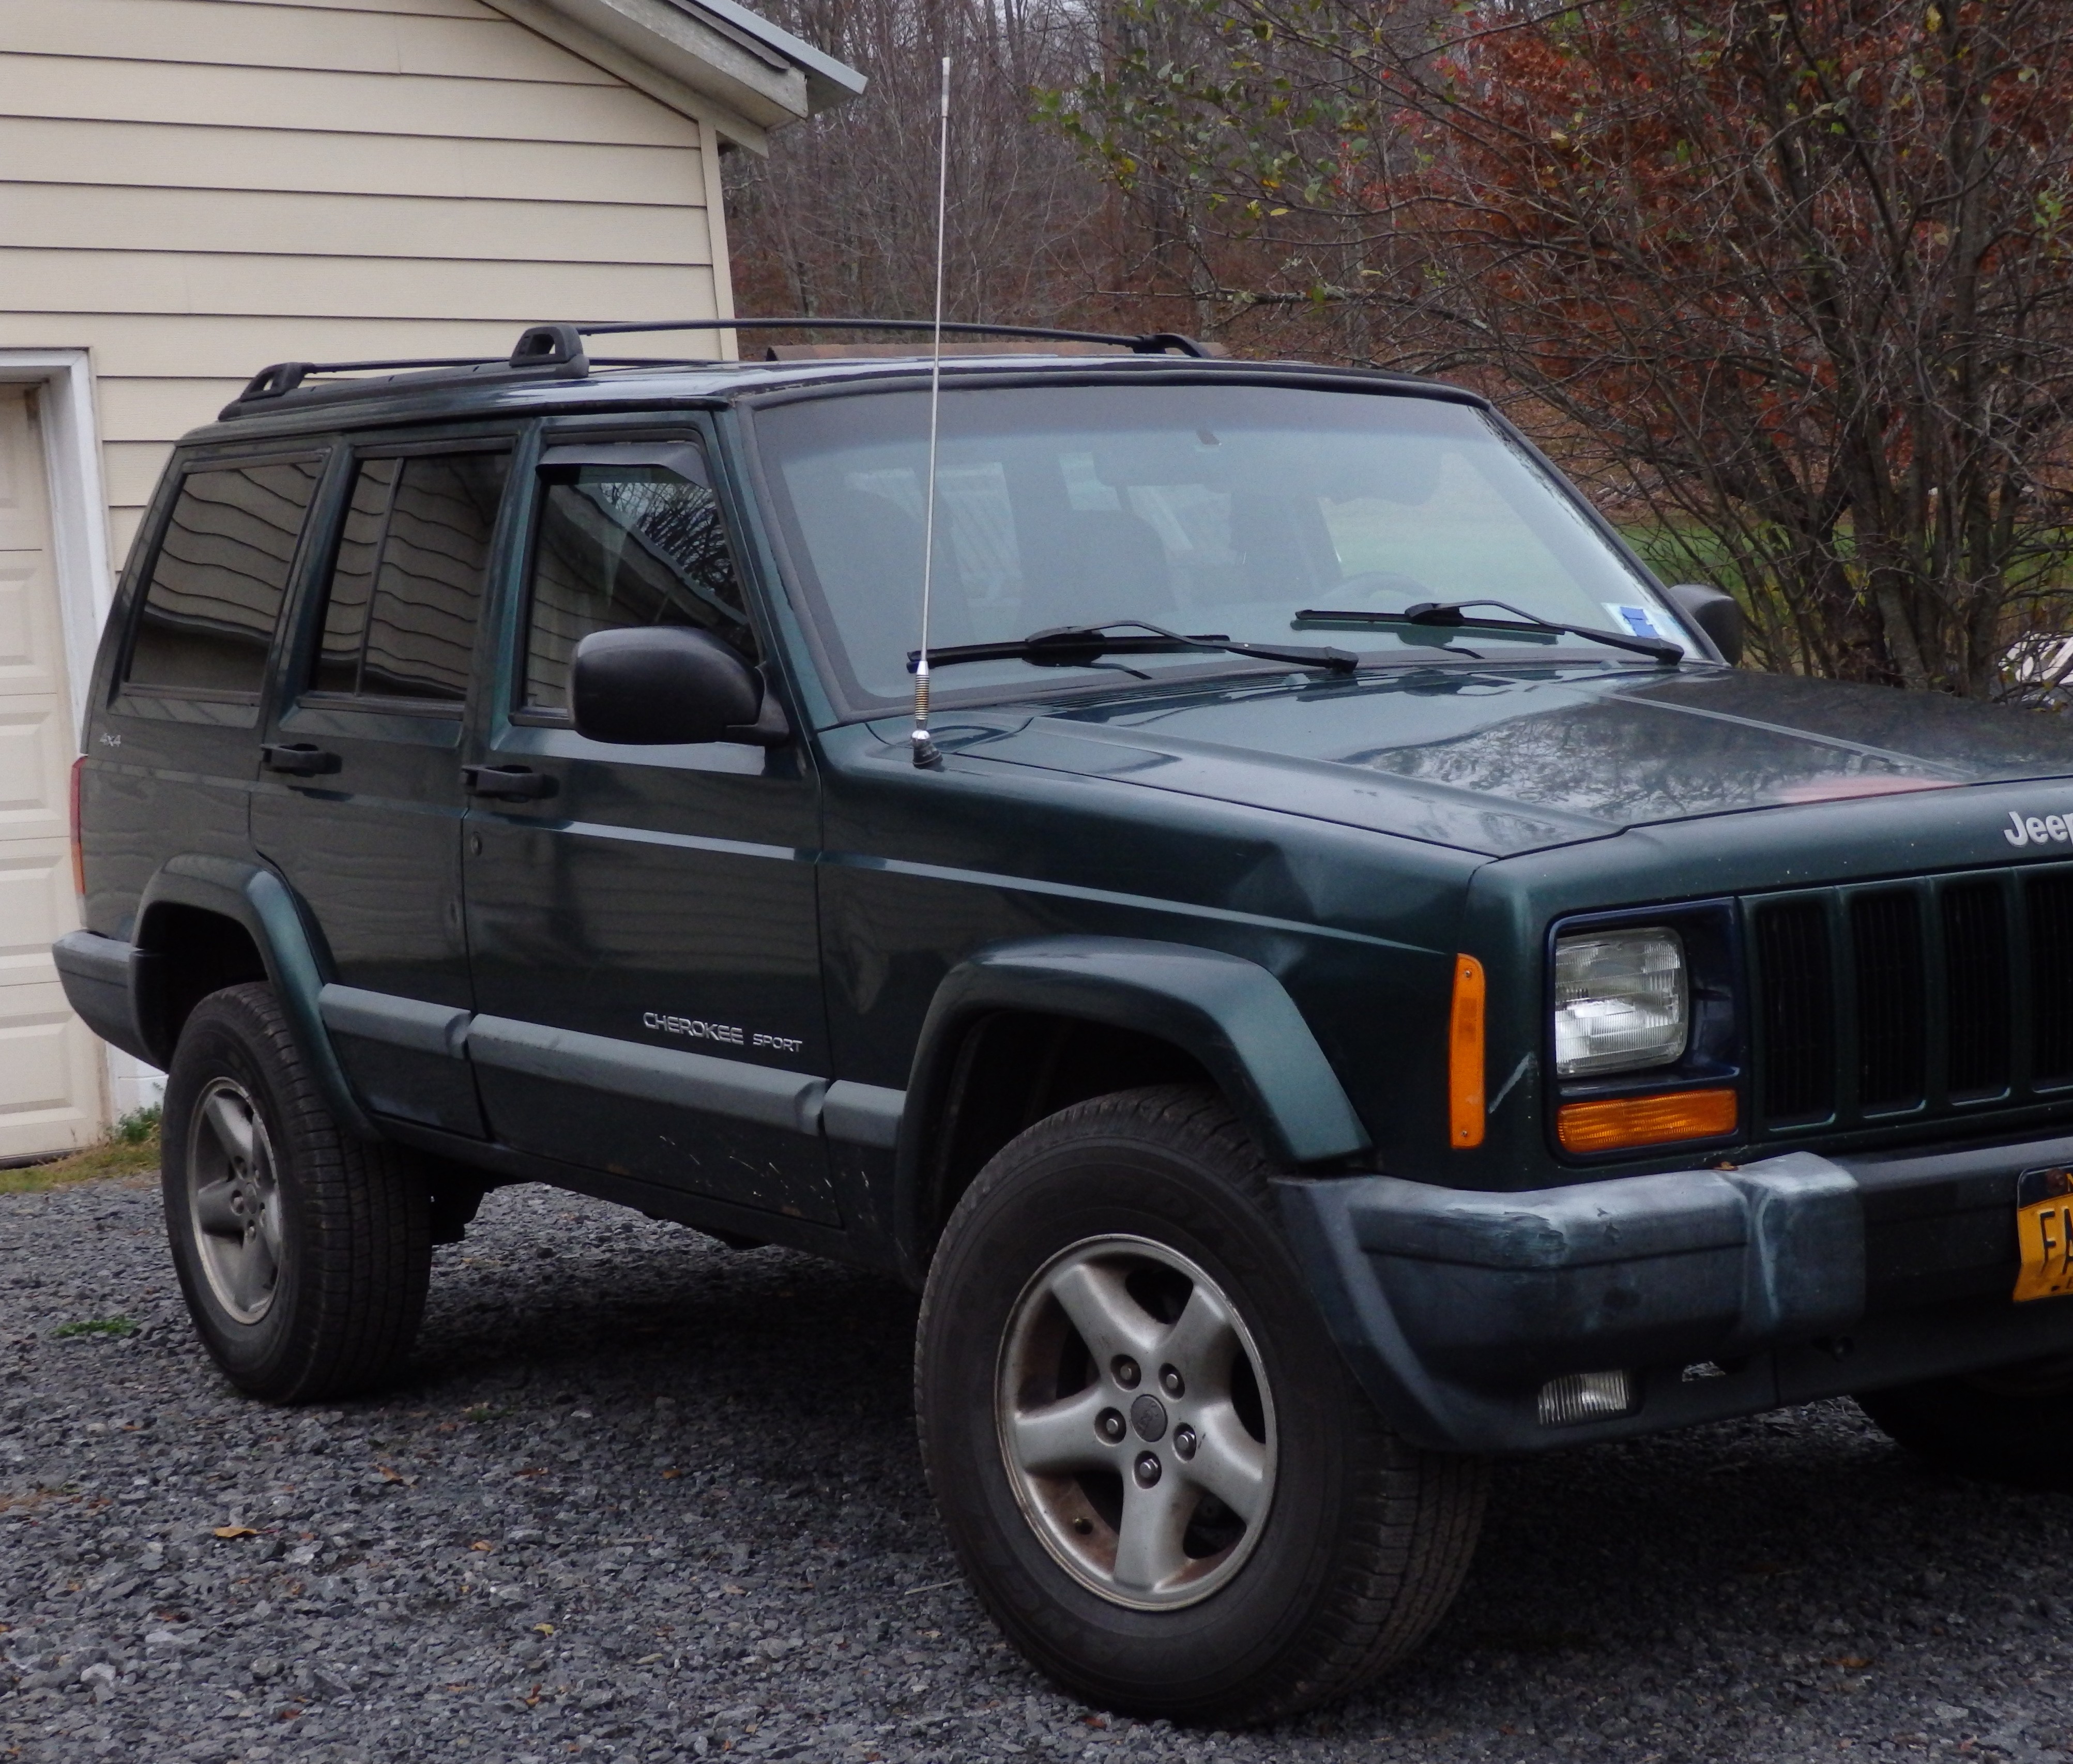 FS [NorAtl]: 2000 Jeep Cherokee Sport / end of year 50% off - Jeep